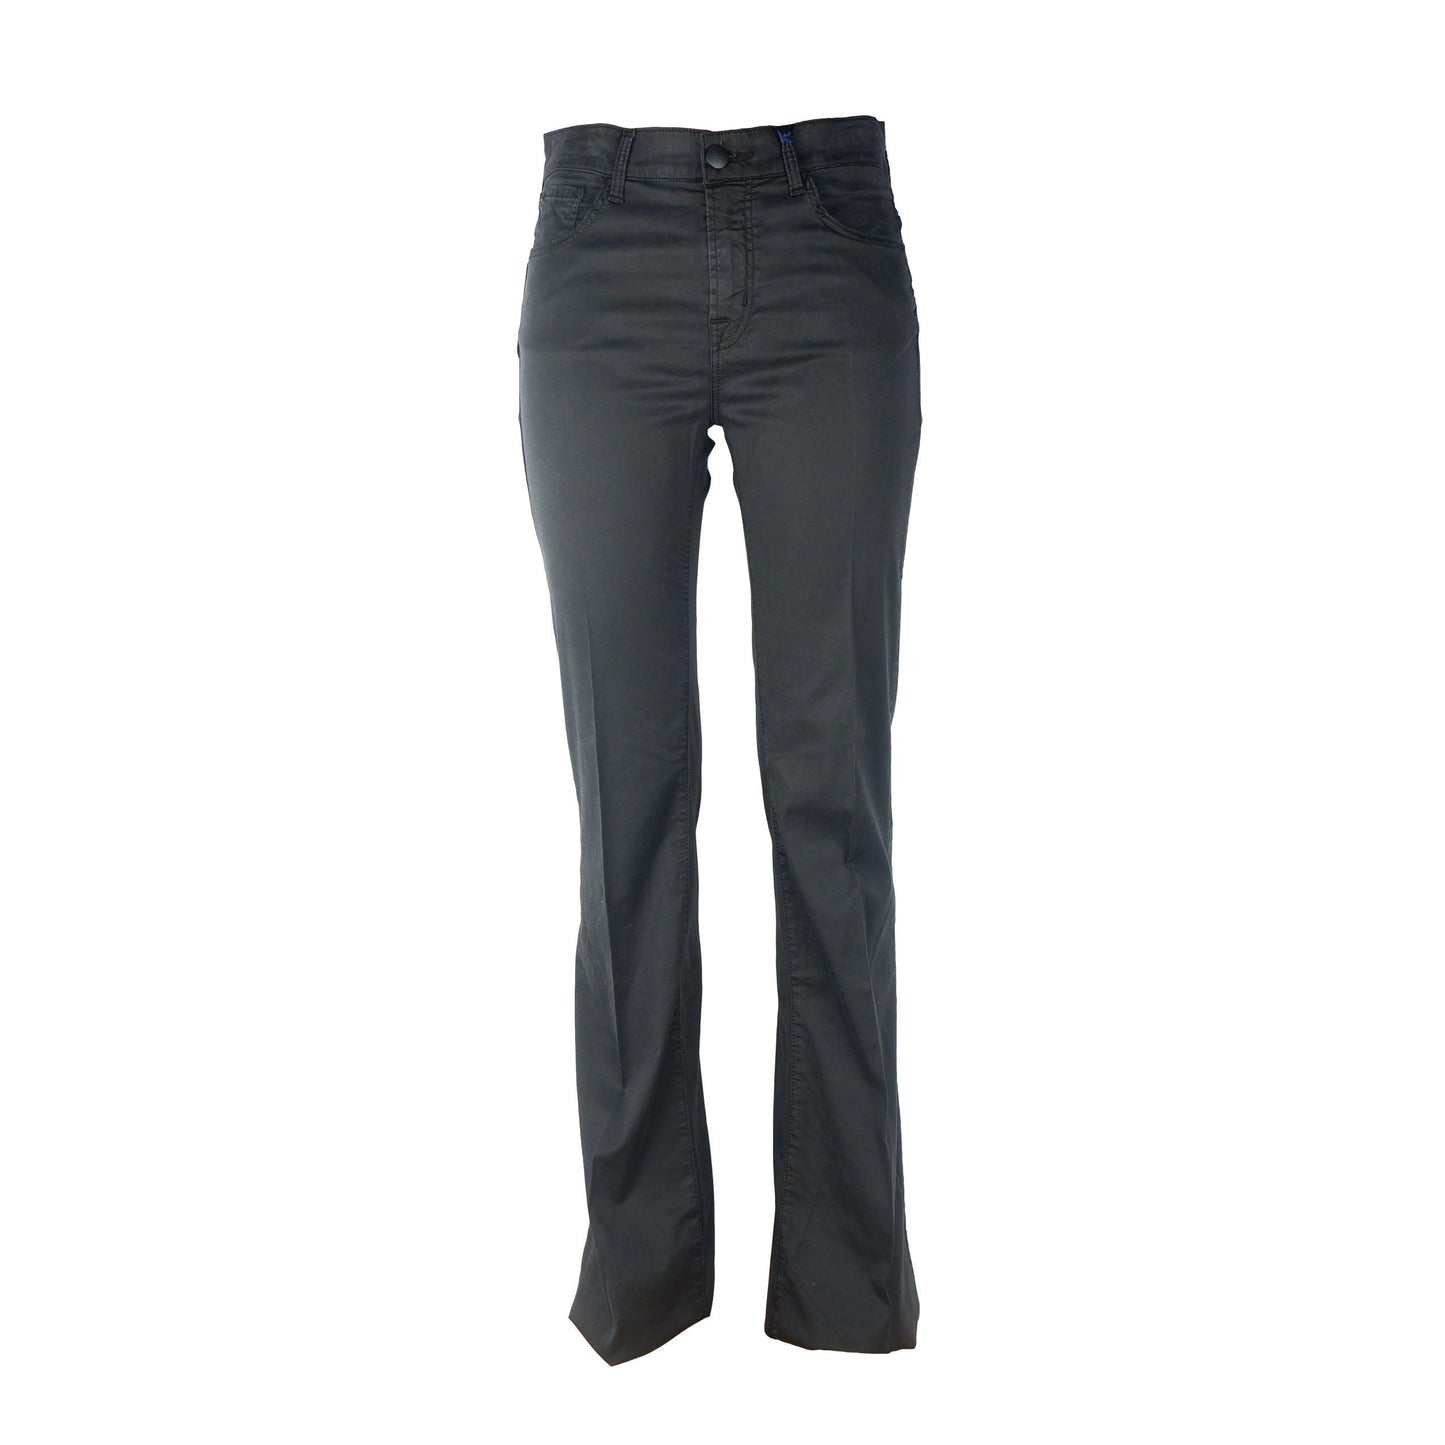 Frida Black Lyocell Blend Trousers with Pony Skin Patch